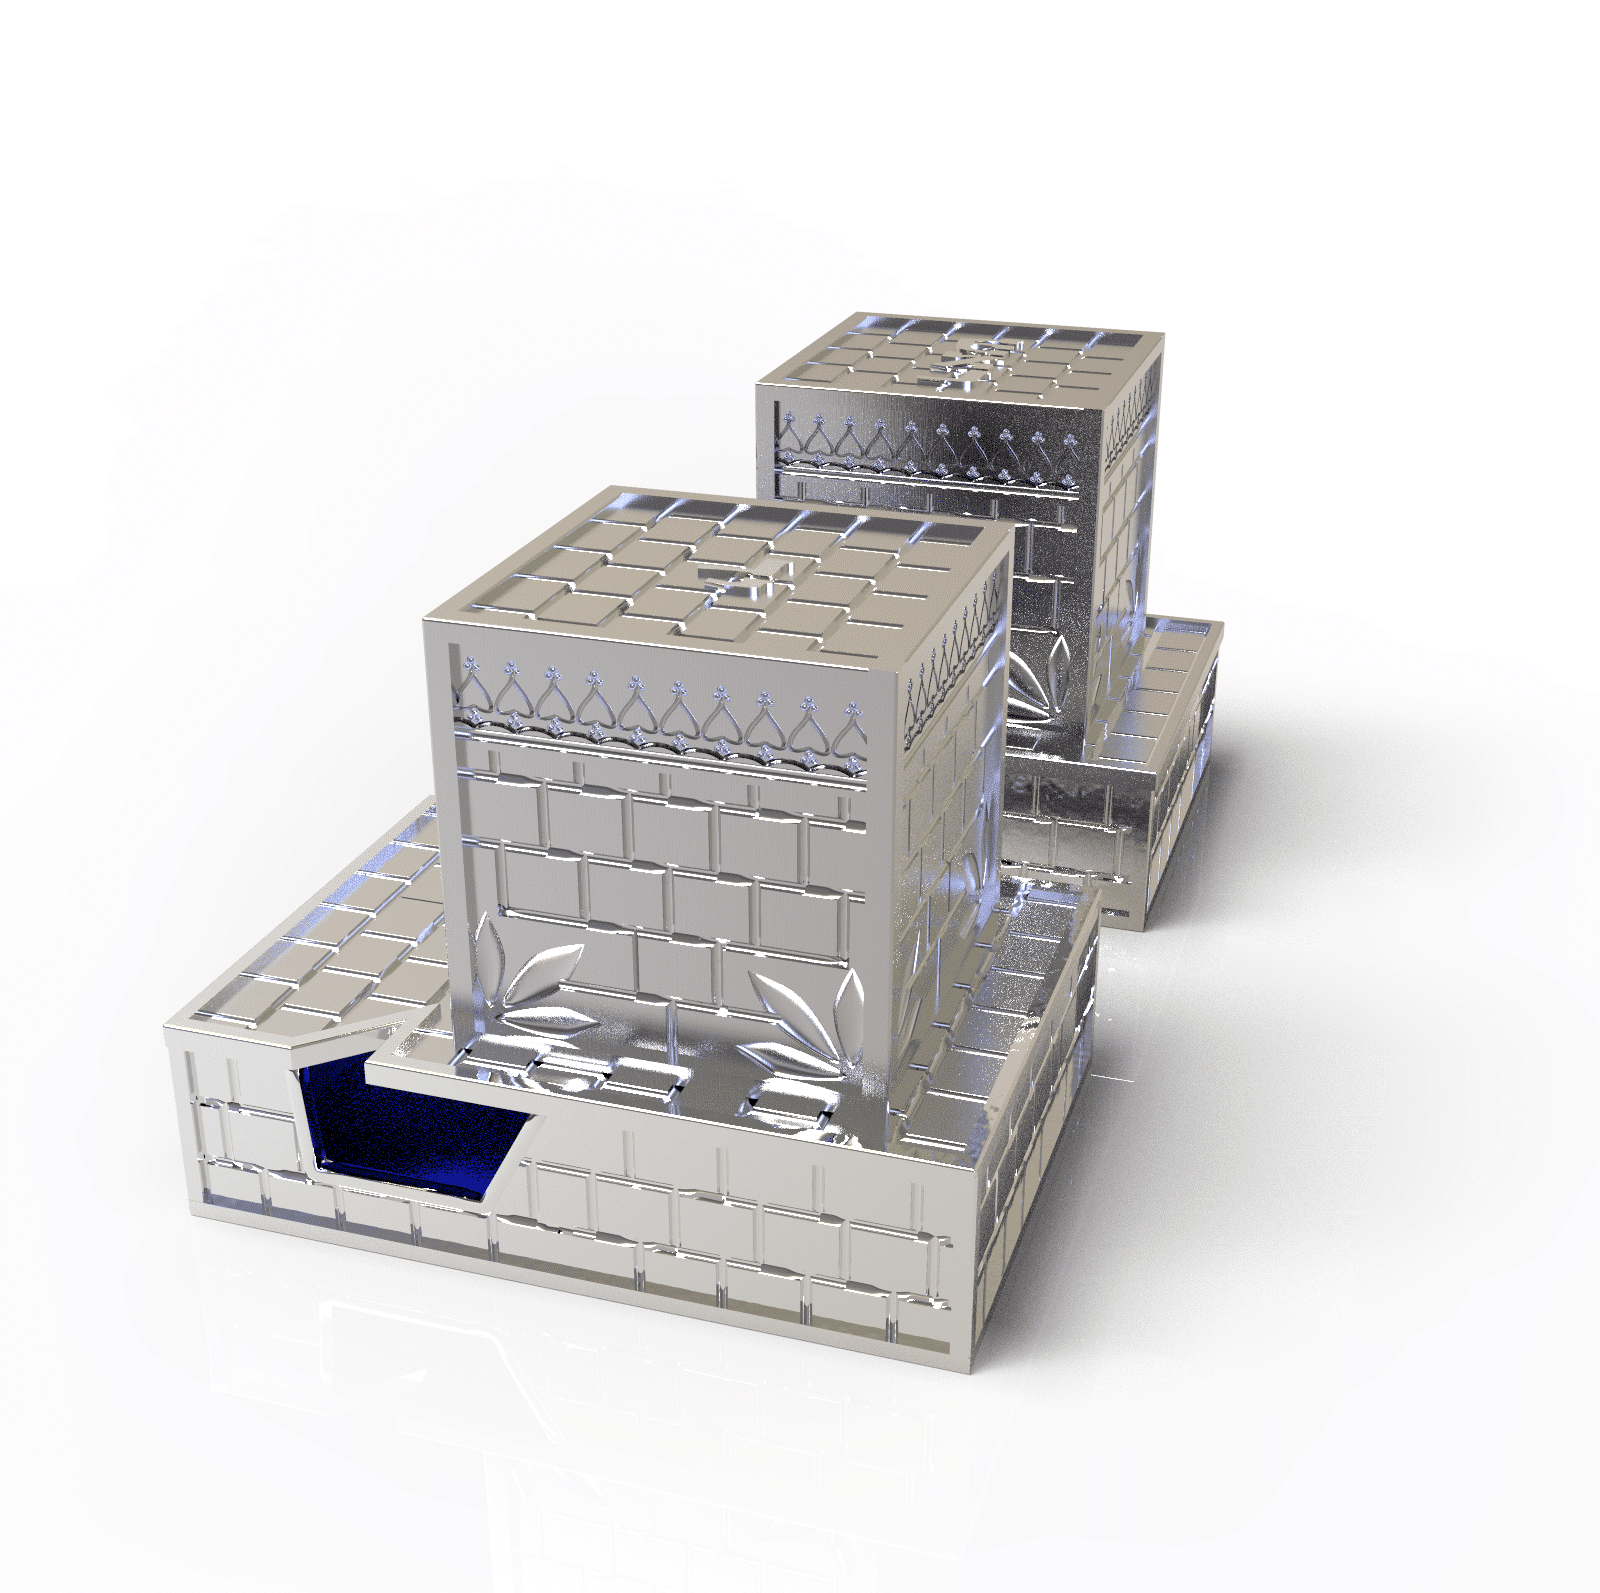 Silver Tefillin Boxes With Jerusalem Walls